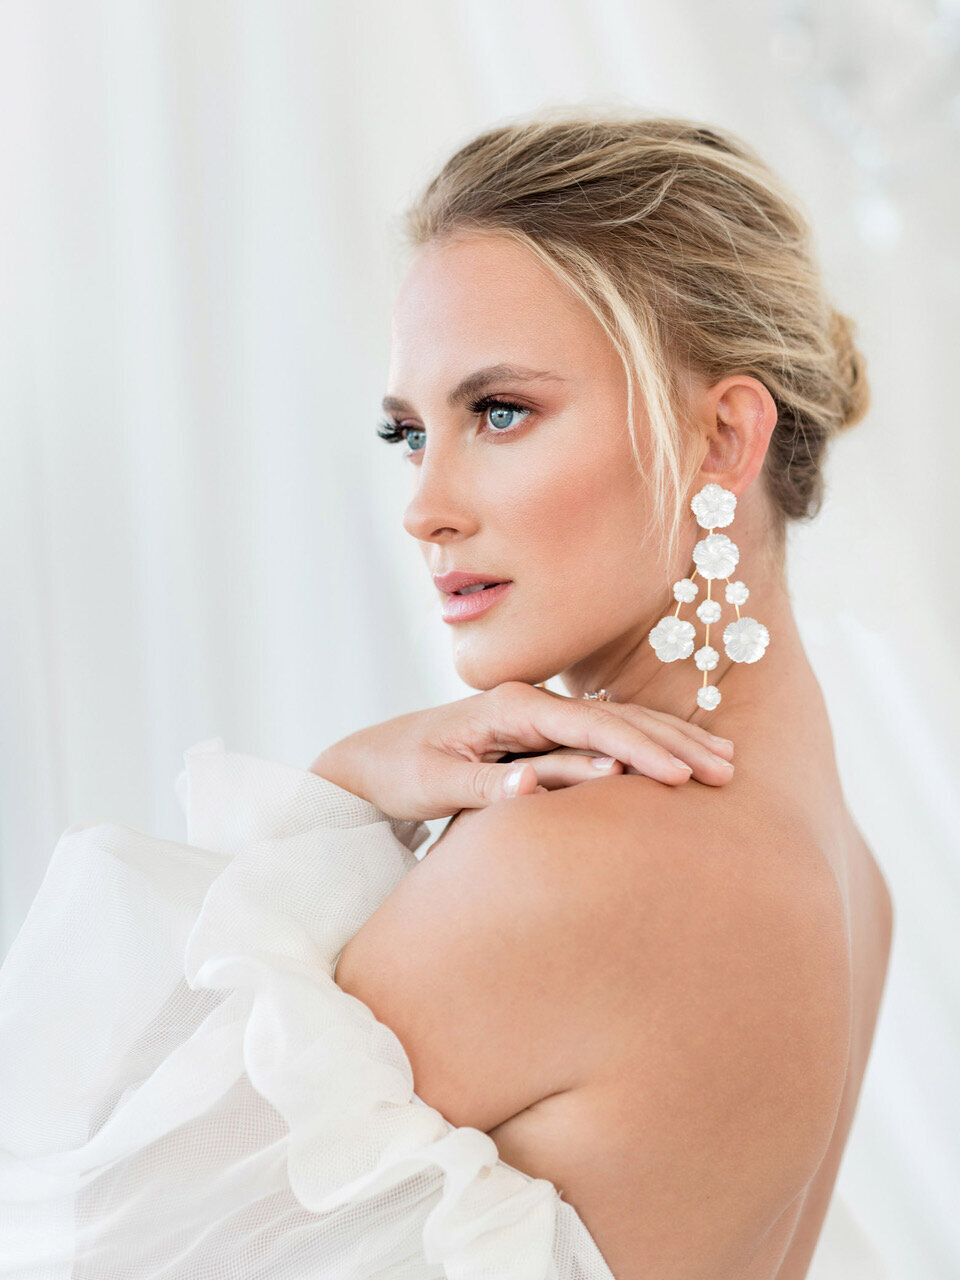 Simple yet elegant hair and makeup by Allysa Helm Beauty, natural glam Vancouver & Ontario hair and makeup artist, featured on the Brontë Bride Vendor Guide.